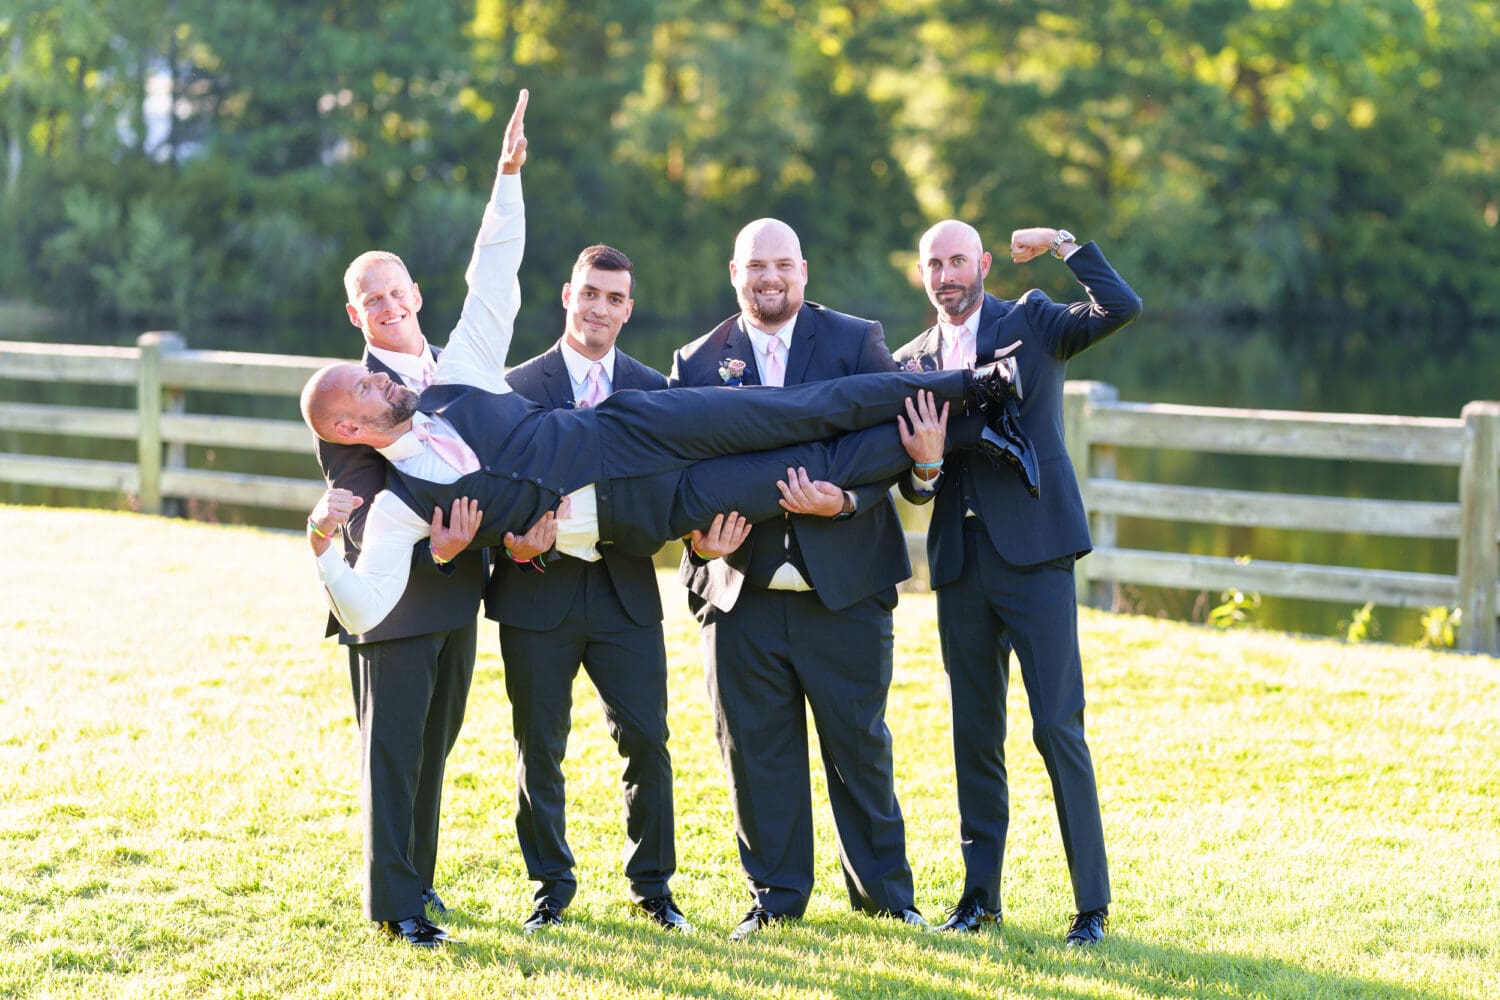 Bodybuilding groomsmen having fun for the pictures - The Pavilion at Pepper Plantation